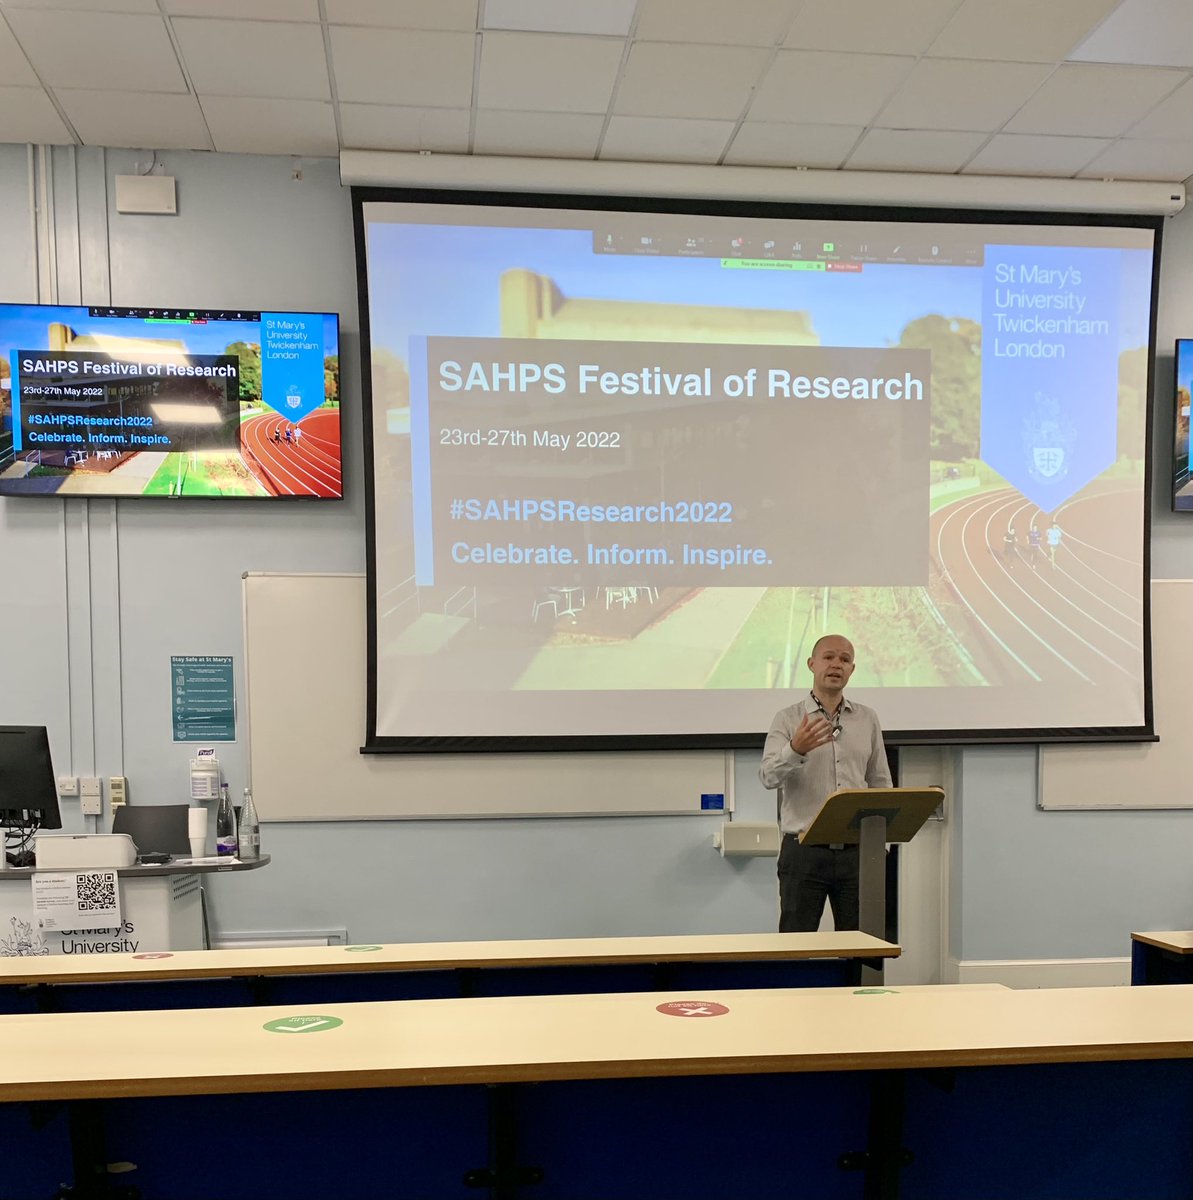 Looking forward to some exciting research over the next couple of days from our Faculty’s Festival of Research 🎉 #SAHPSResearch2022 @YourStMarys @StMarysSAHPS @SportRehab_